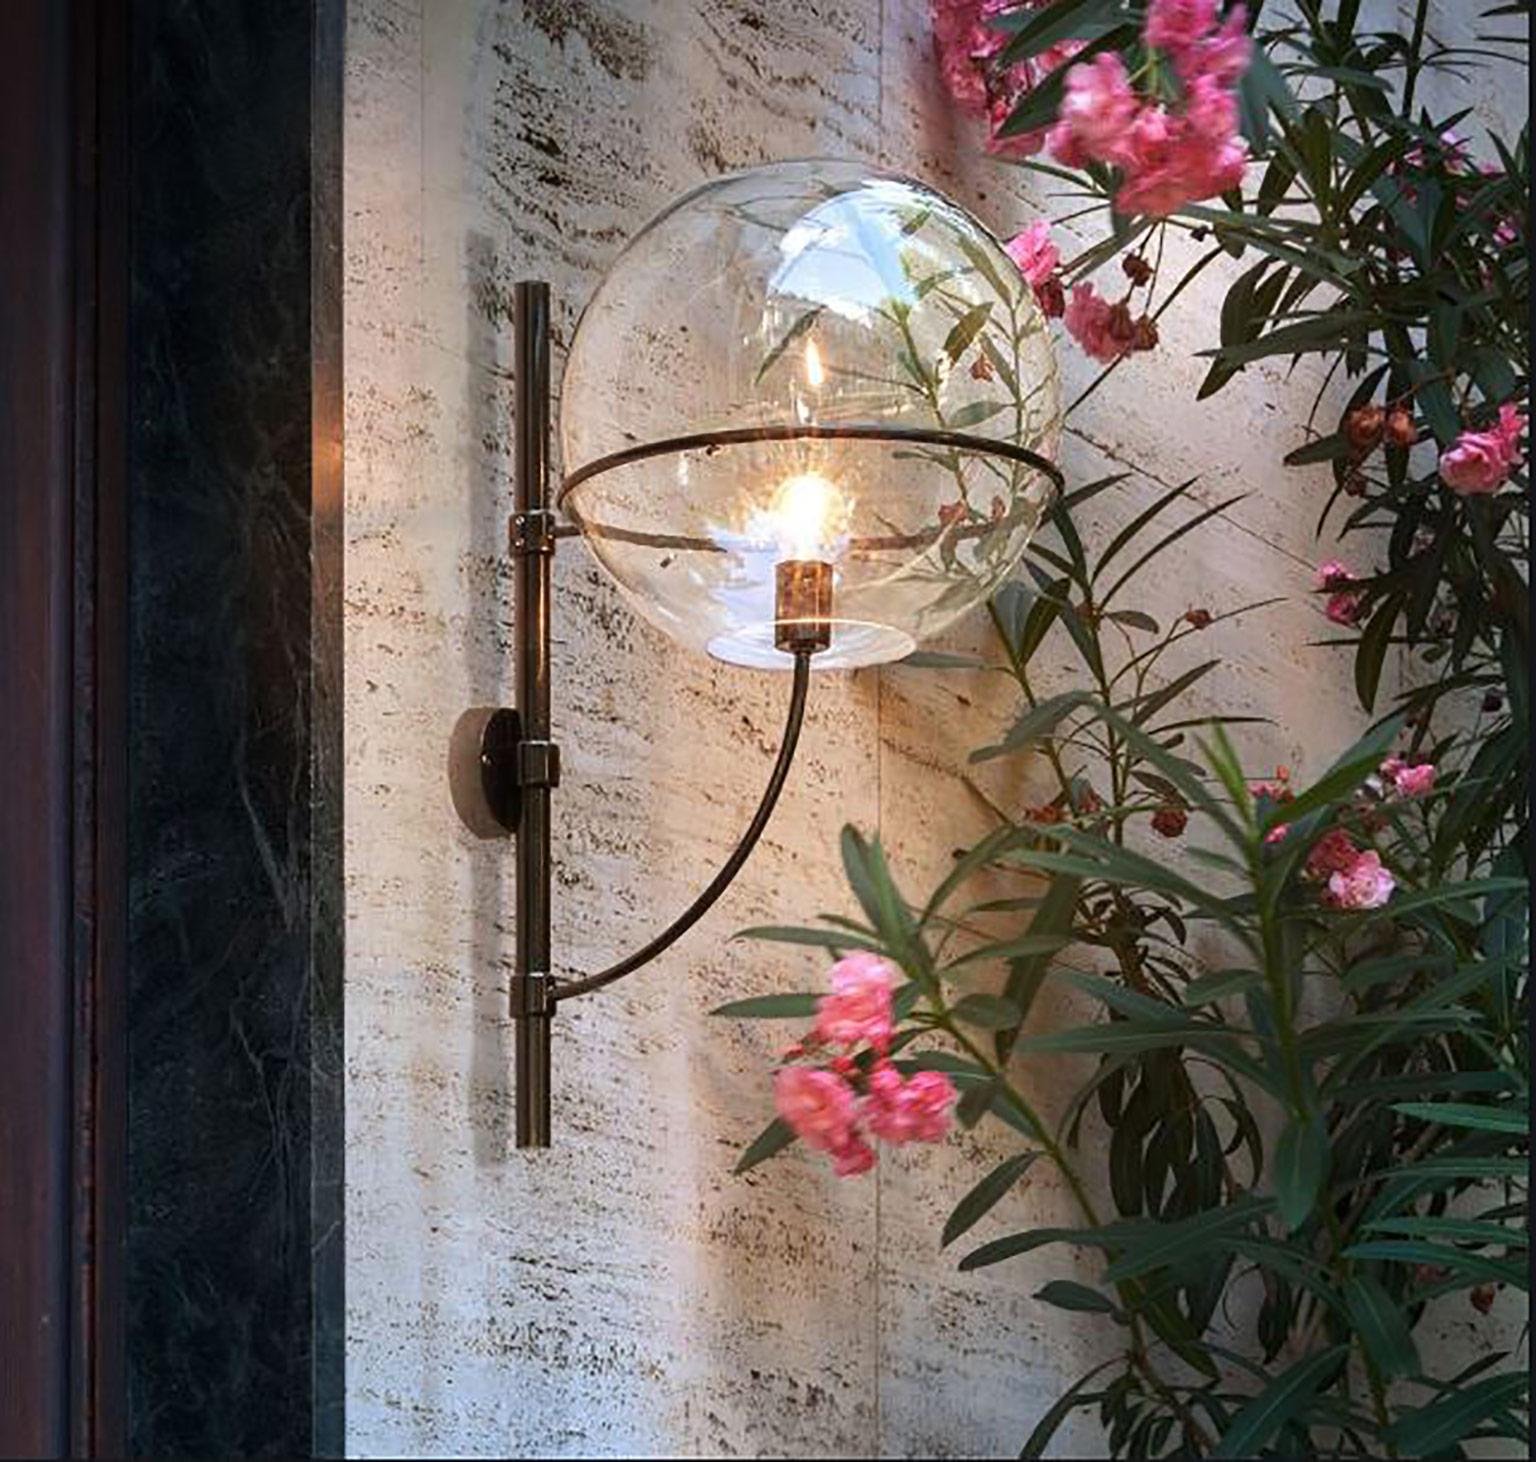 Lyndon-160 outdoor lamp by Vico Magistretti for Oluce. This wall-mounted outdoor fixture has one globe of transparent polycarbonate. The metal body is zinc-plated with a black lacquered finish. Available in two sizes.

Dimensions
160 - 50cm D x